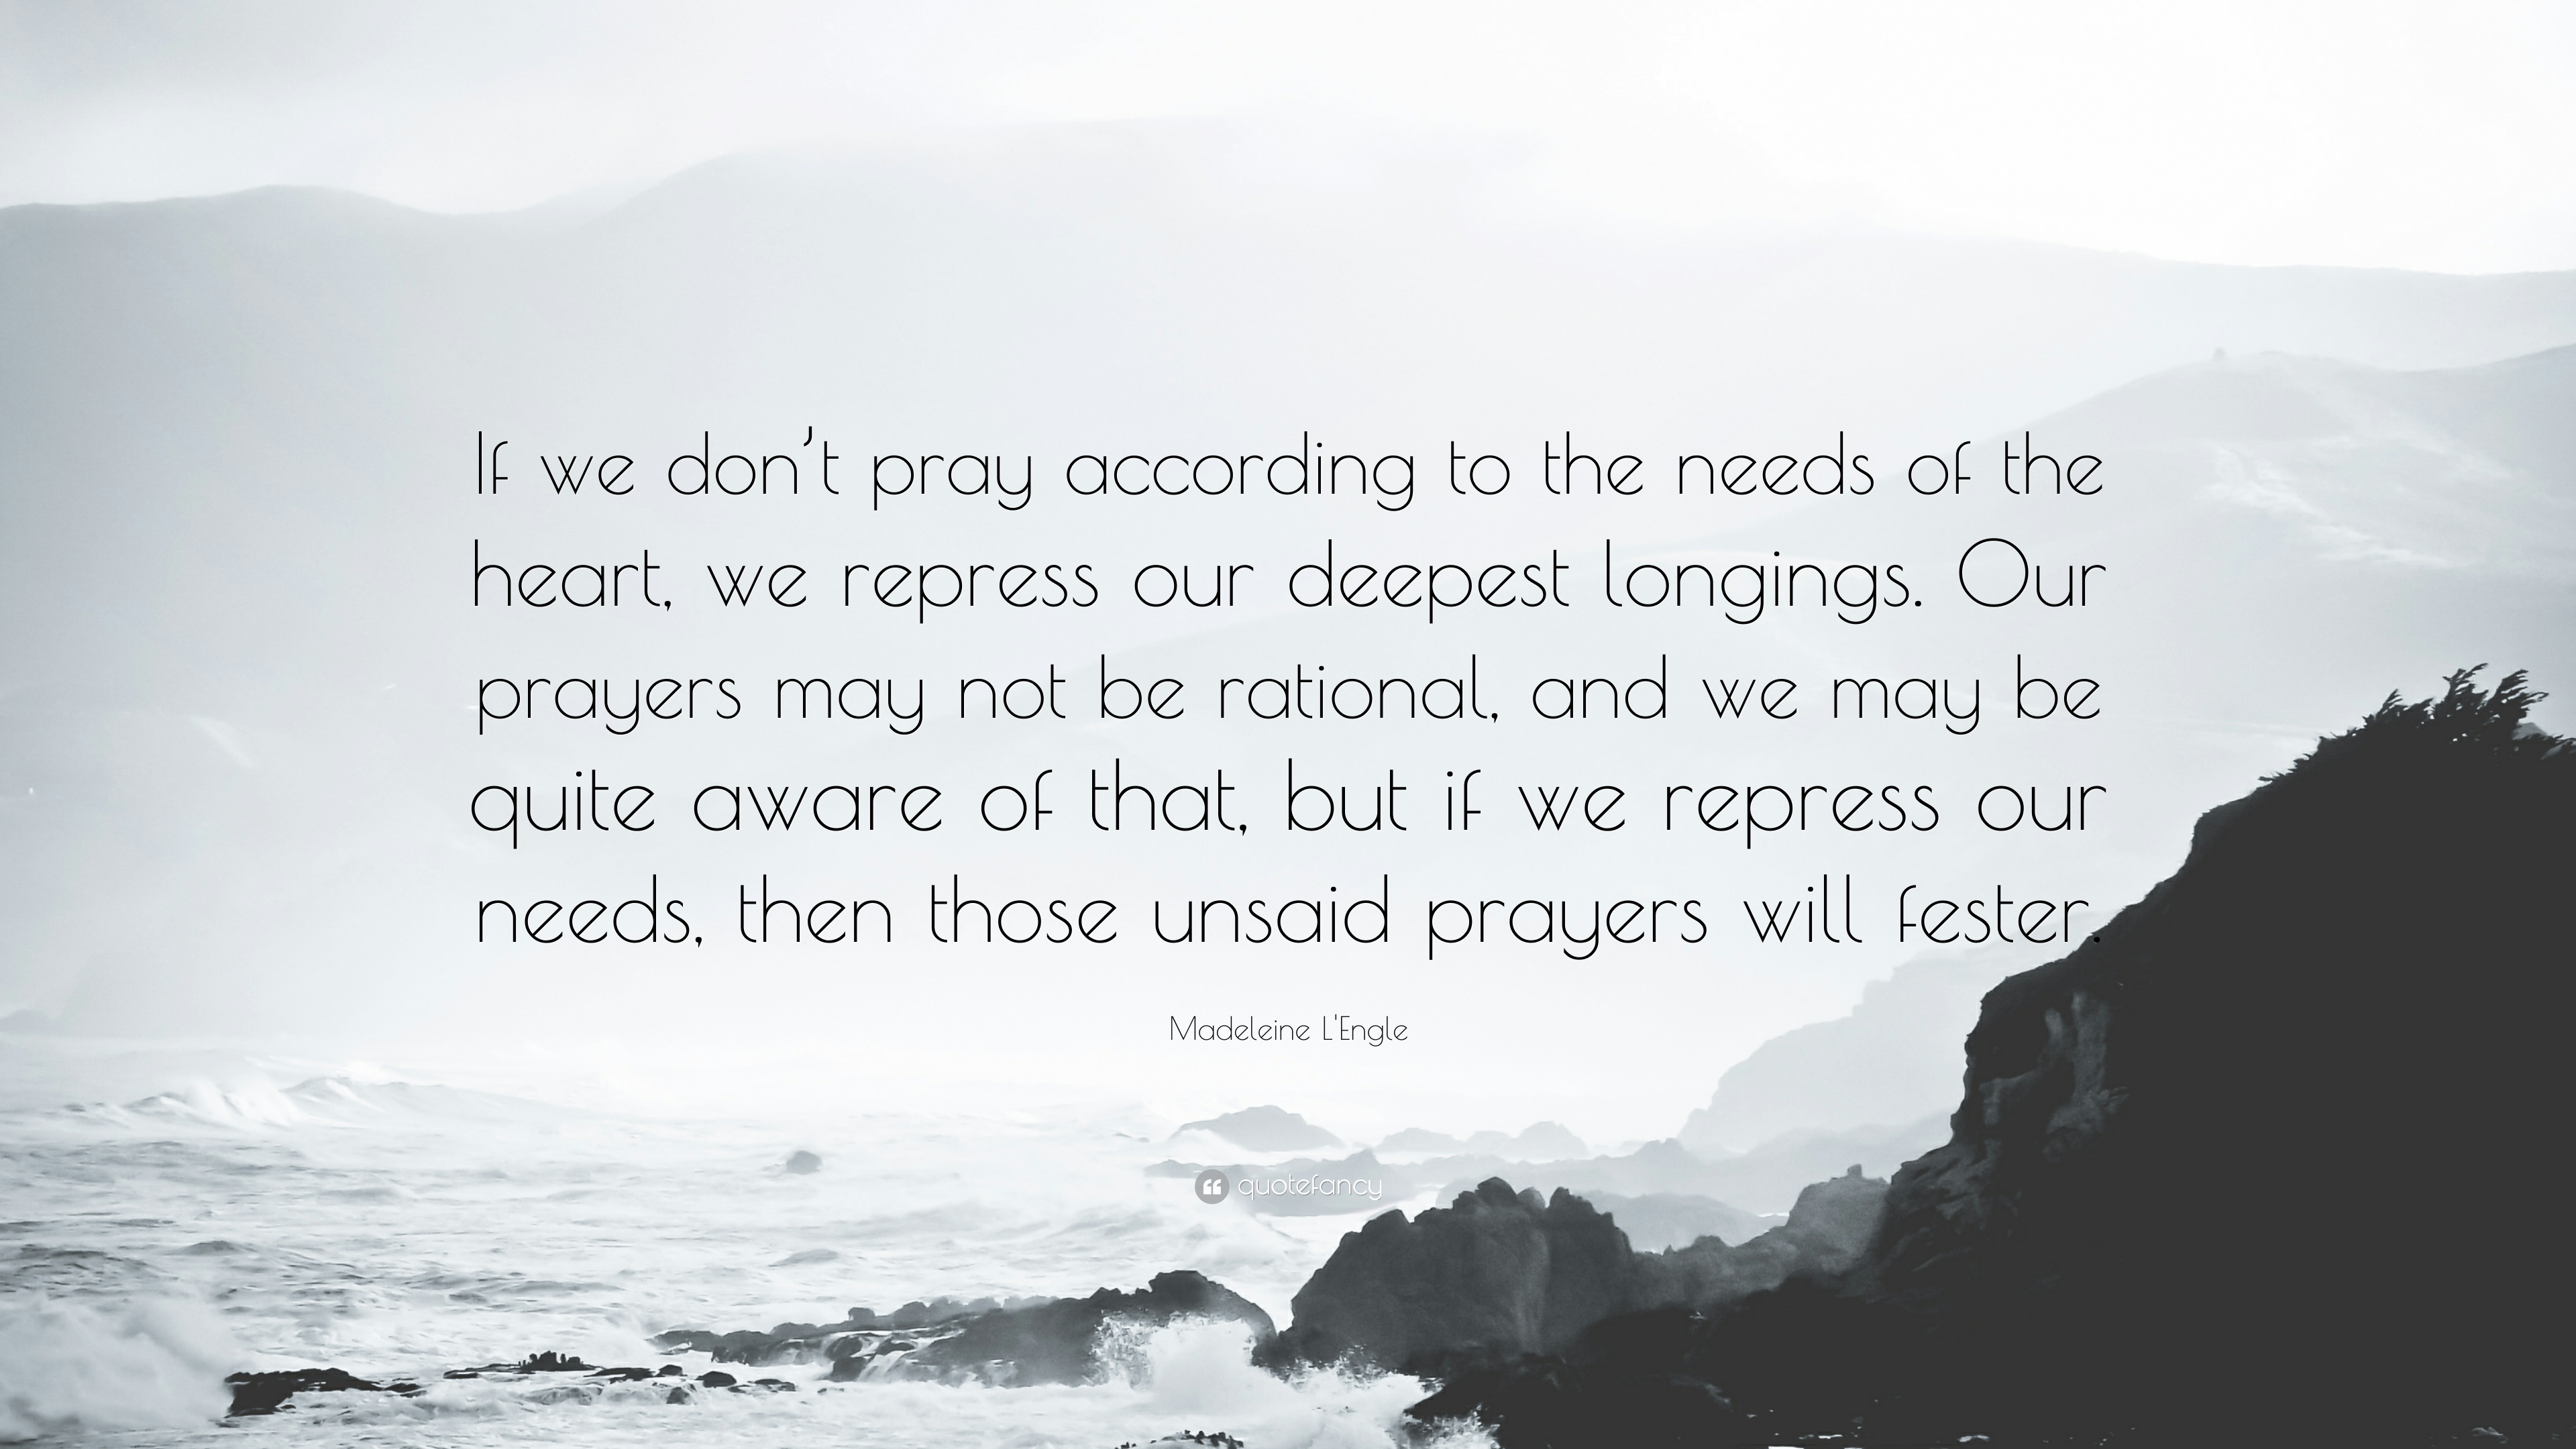 Madeleine L'Engle Quote: “If we don't pray according to the needs of ...